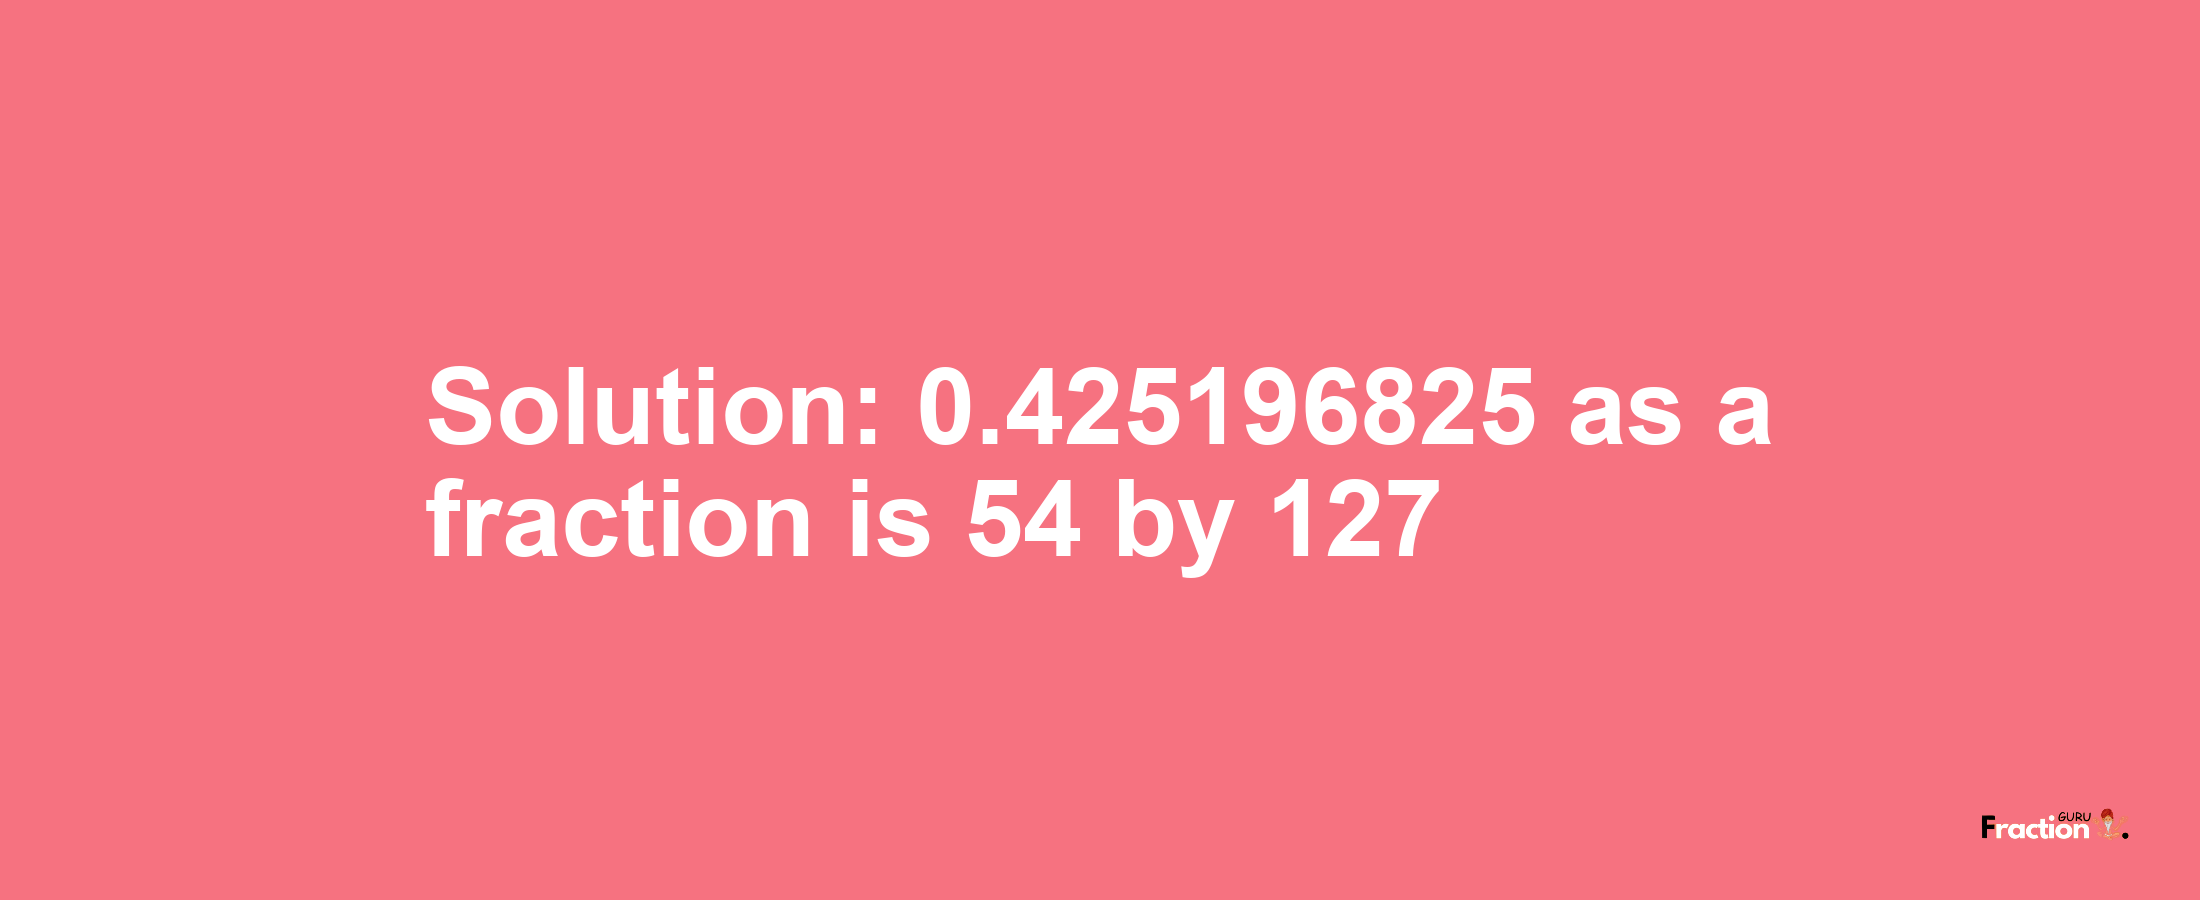 Solution:0.425196825 as a fraction is 54/127